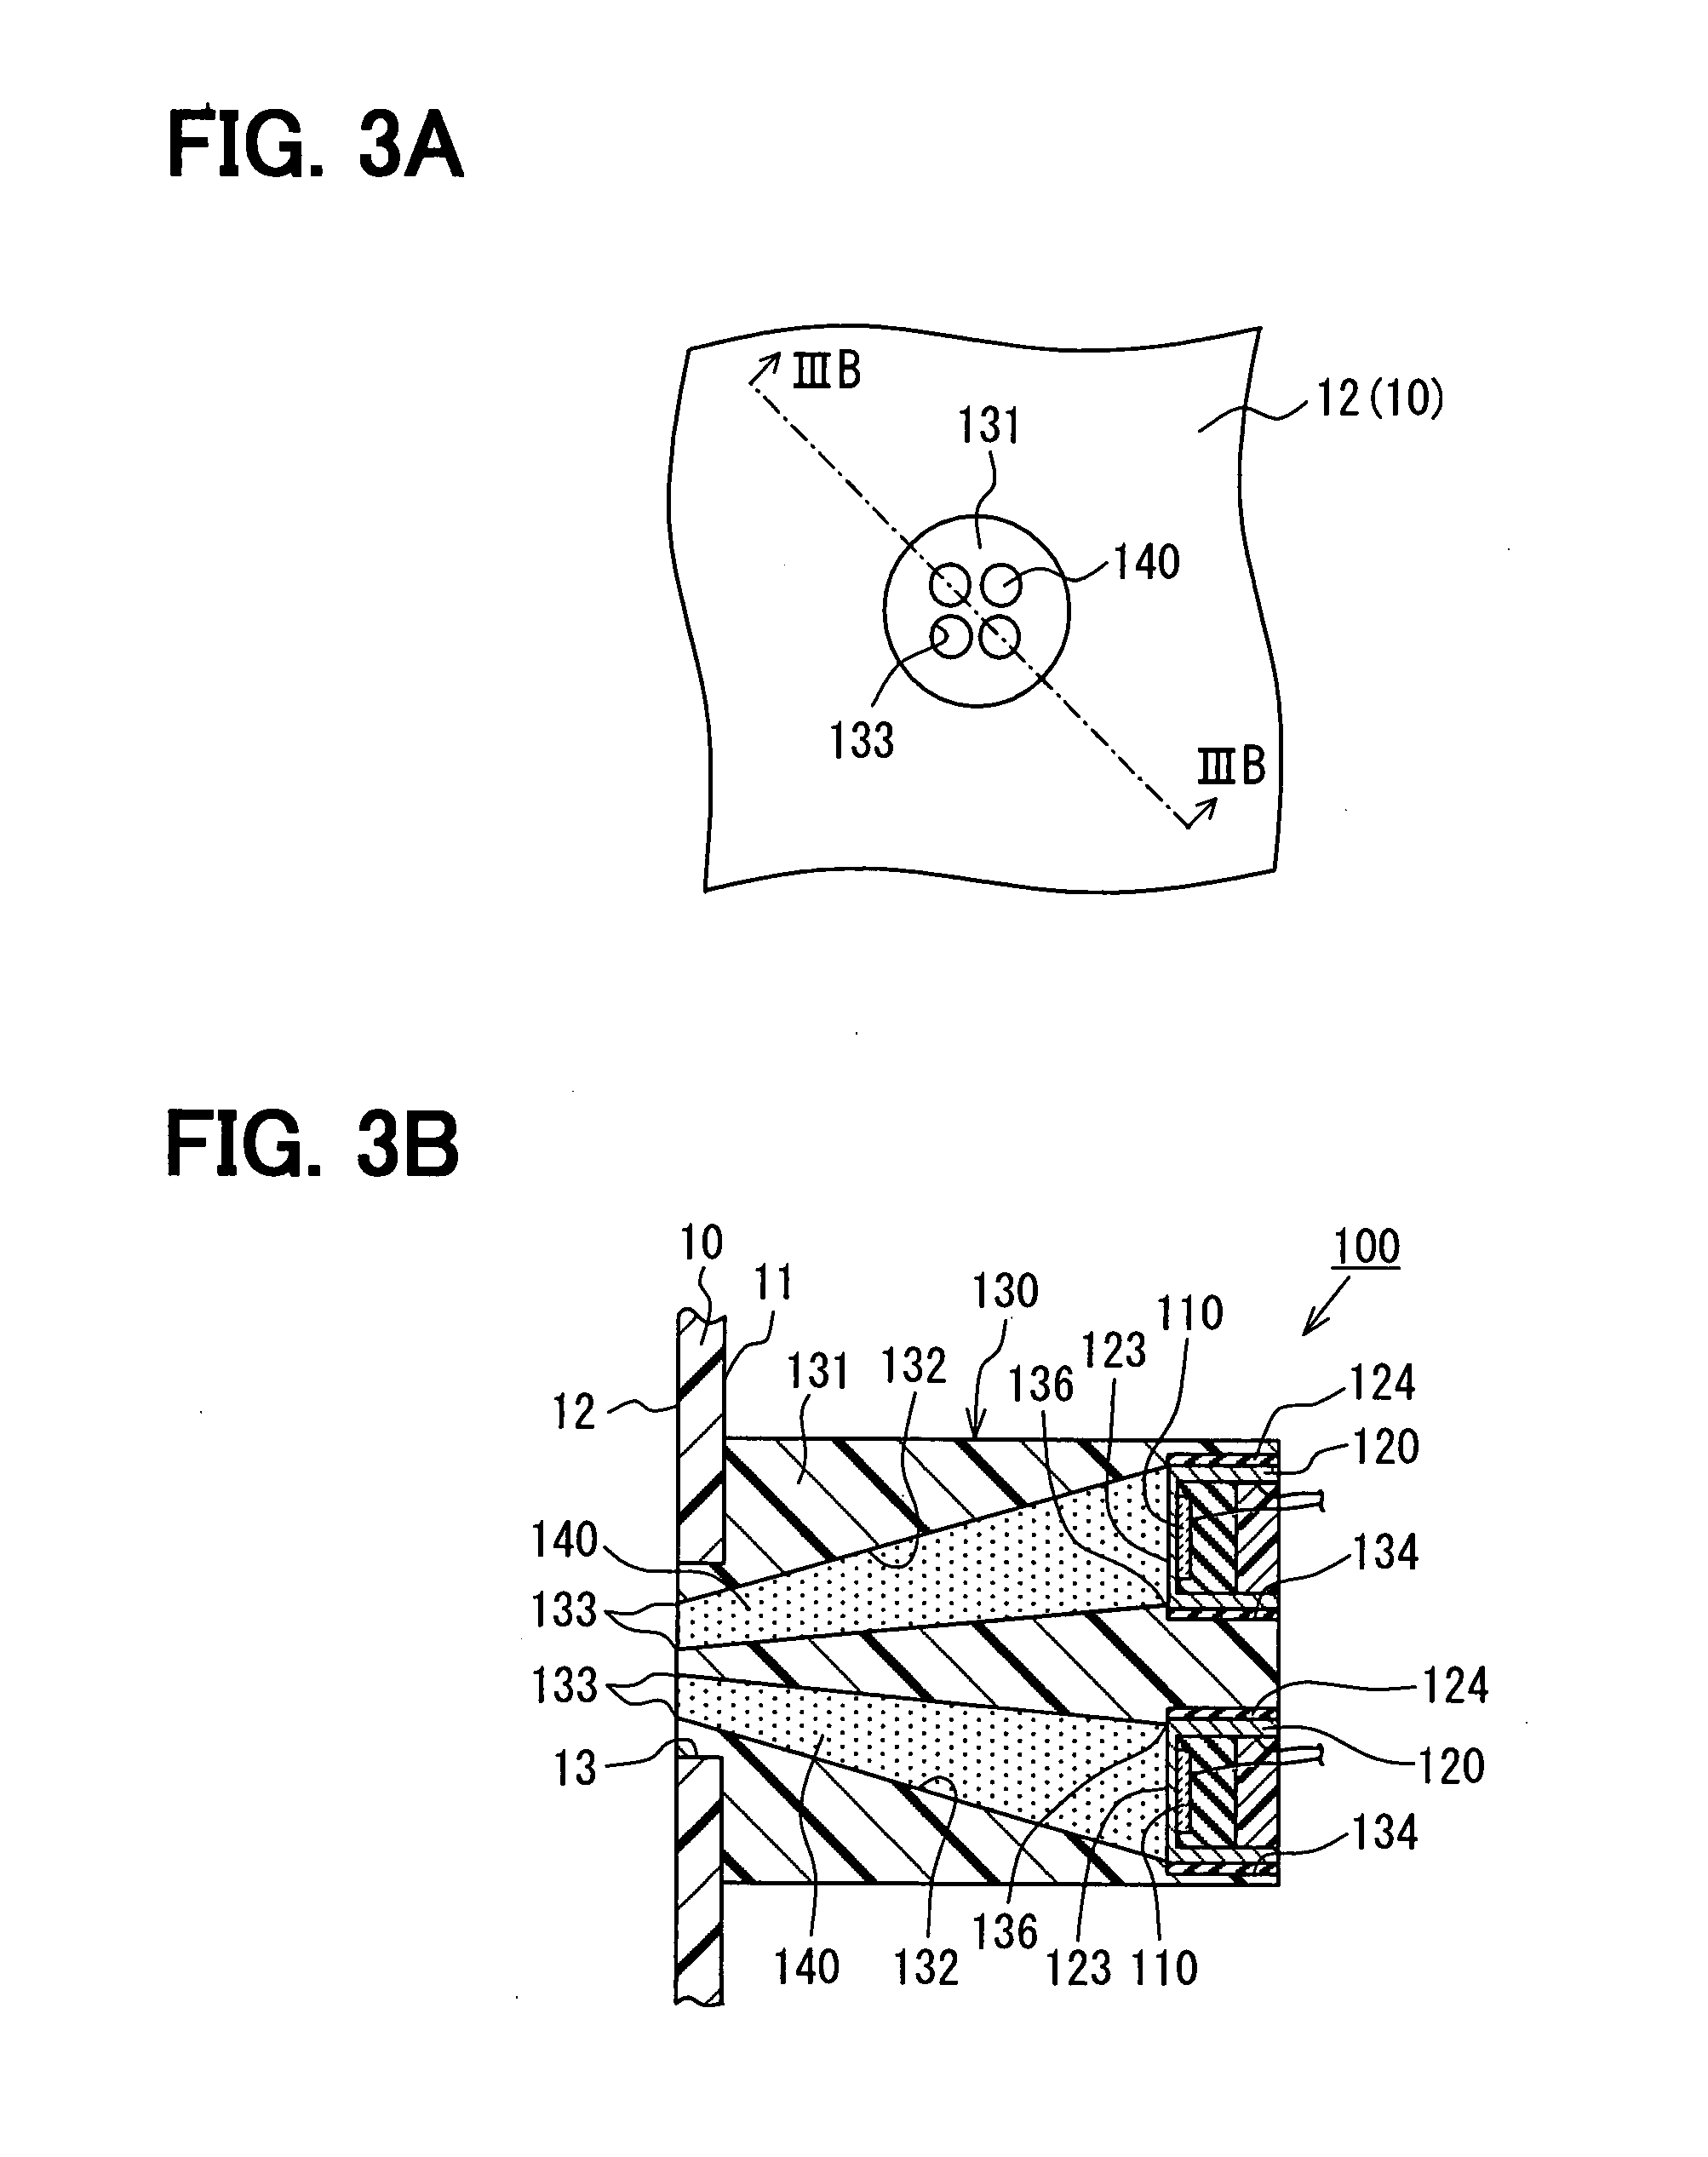 Ultrasonic sensor and obstacle detection device